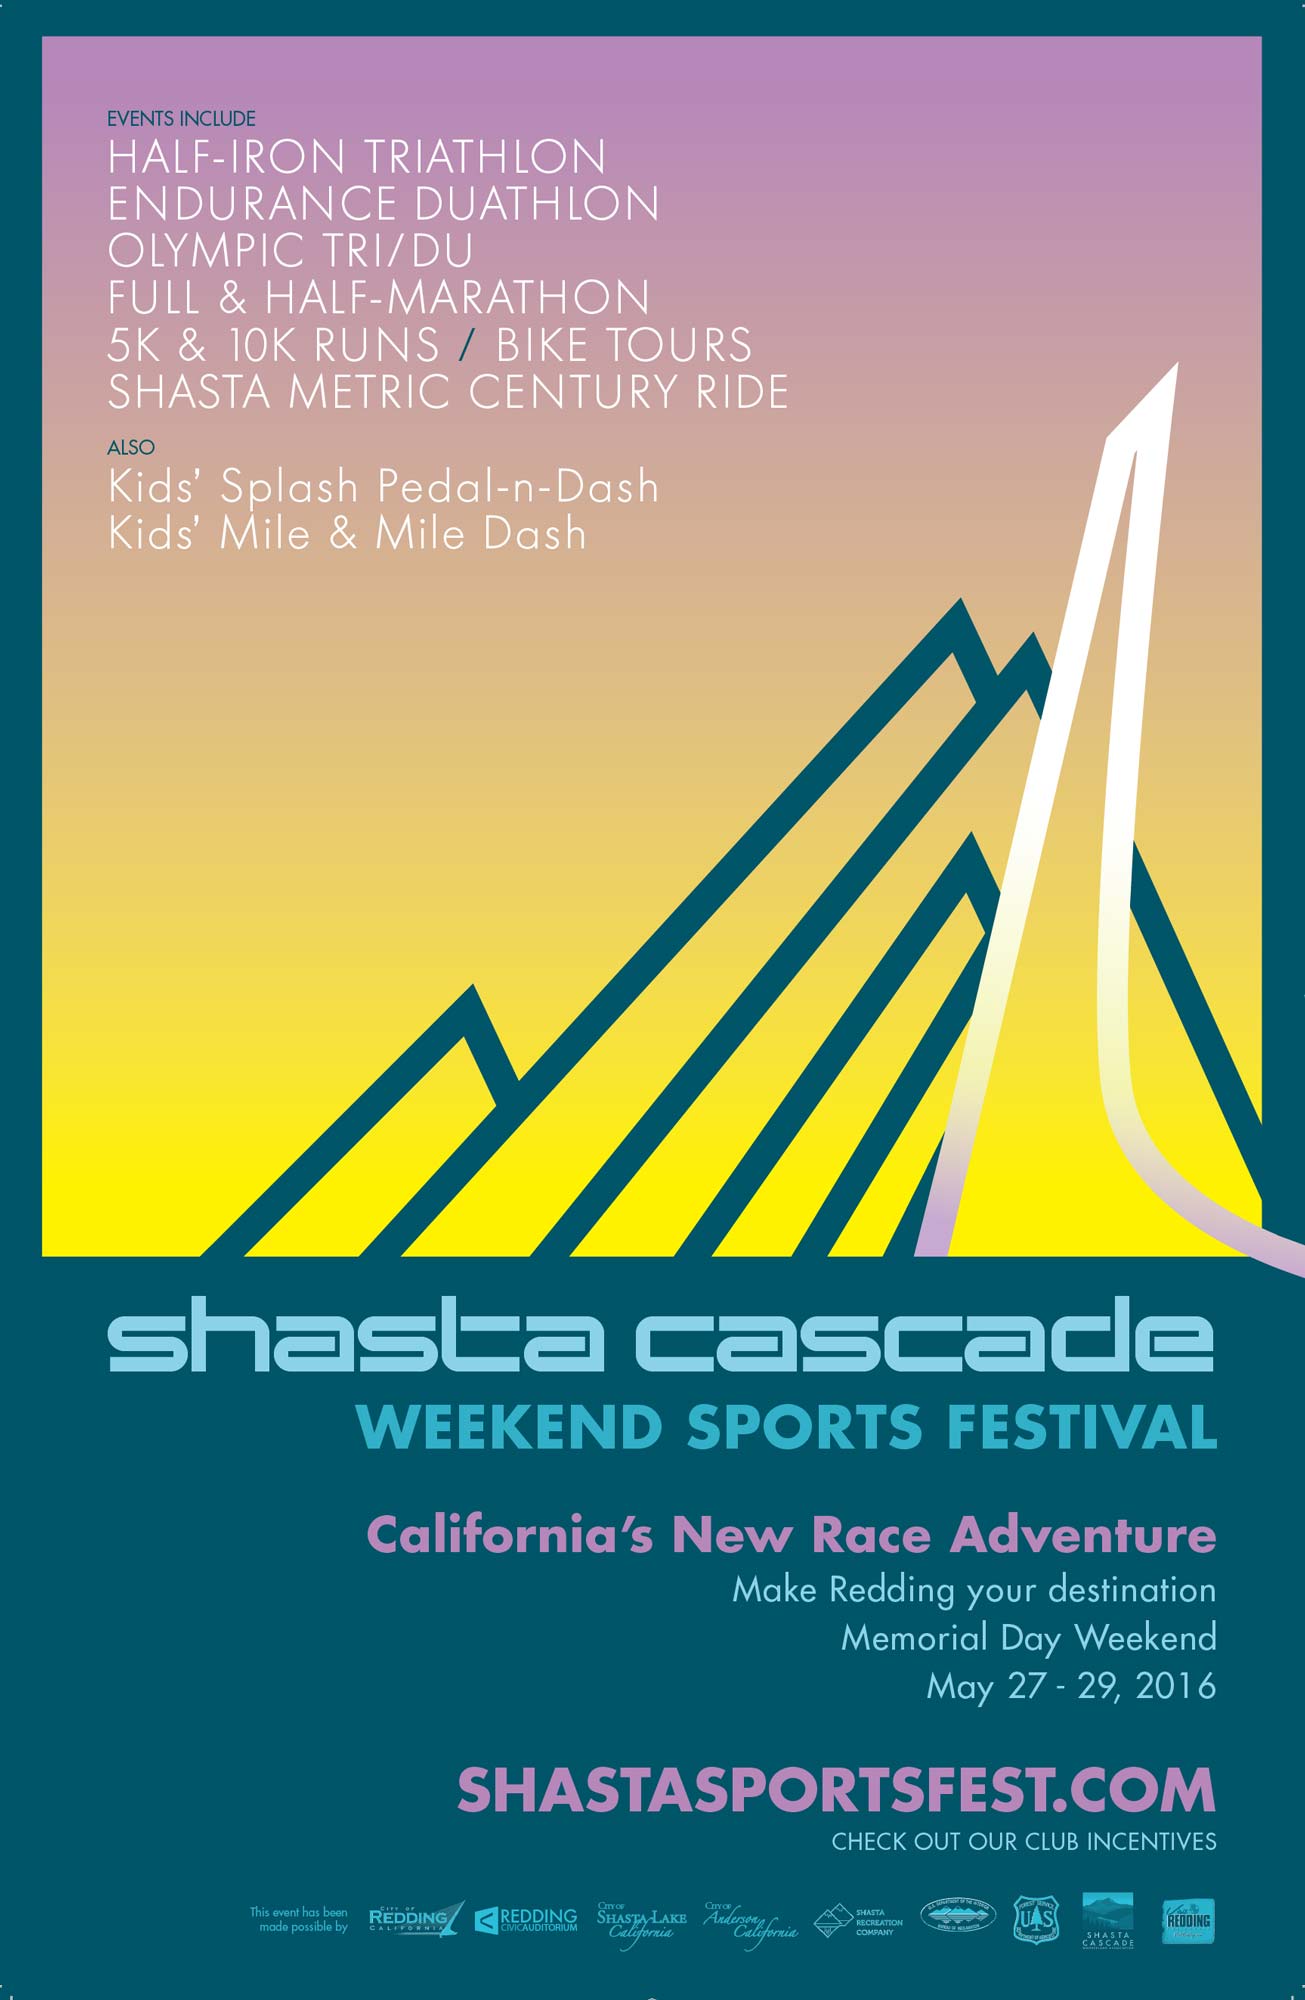 Our work: Shasta Cascade Sports Event Poster